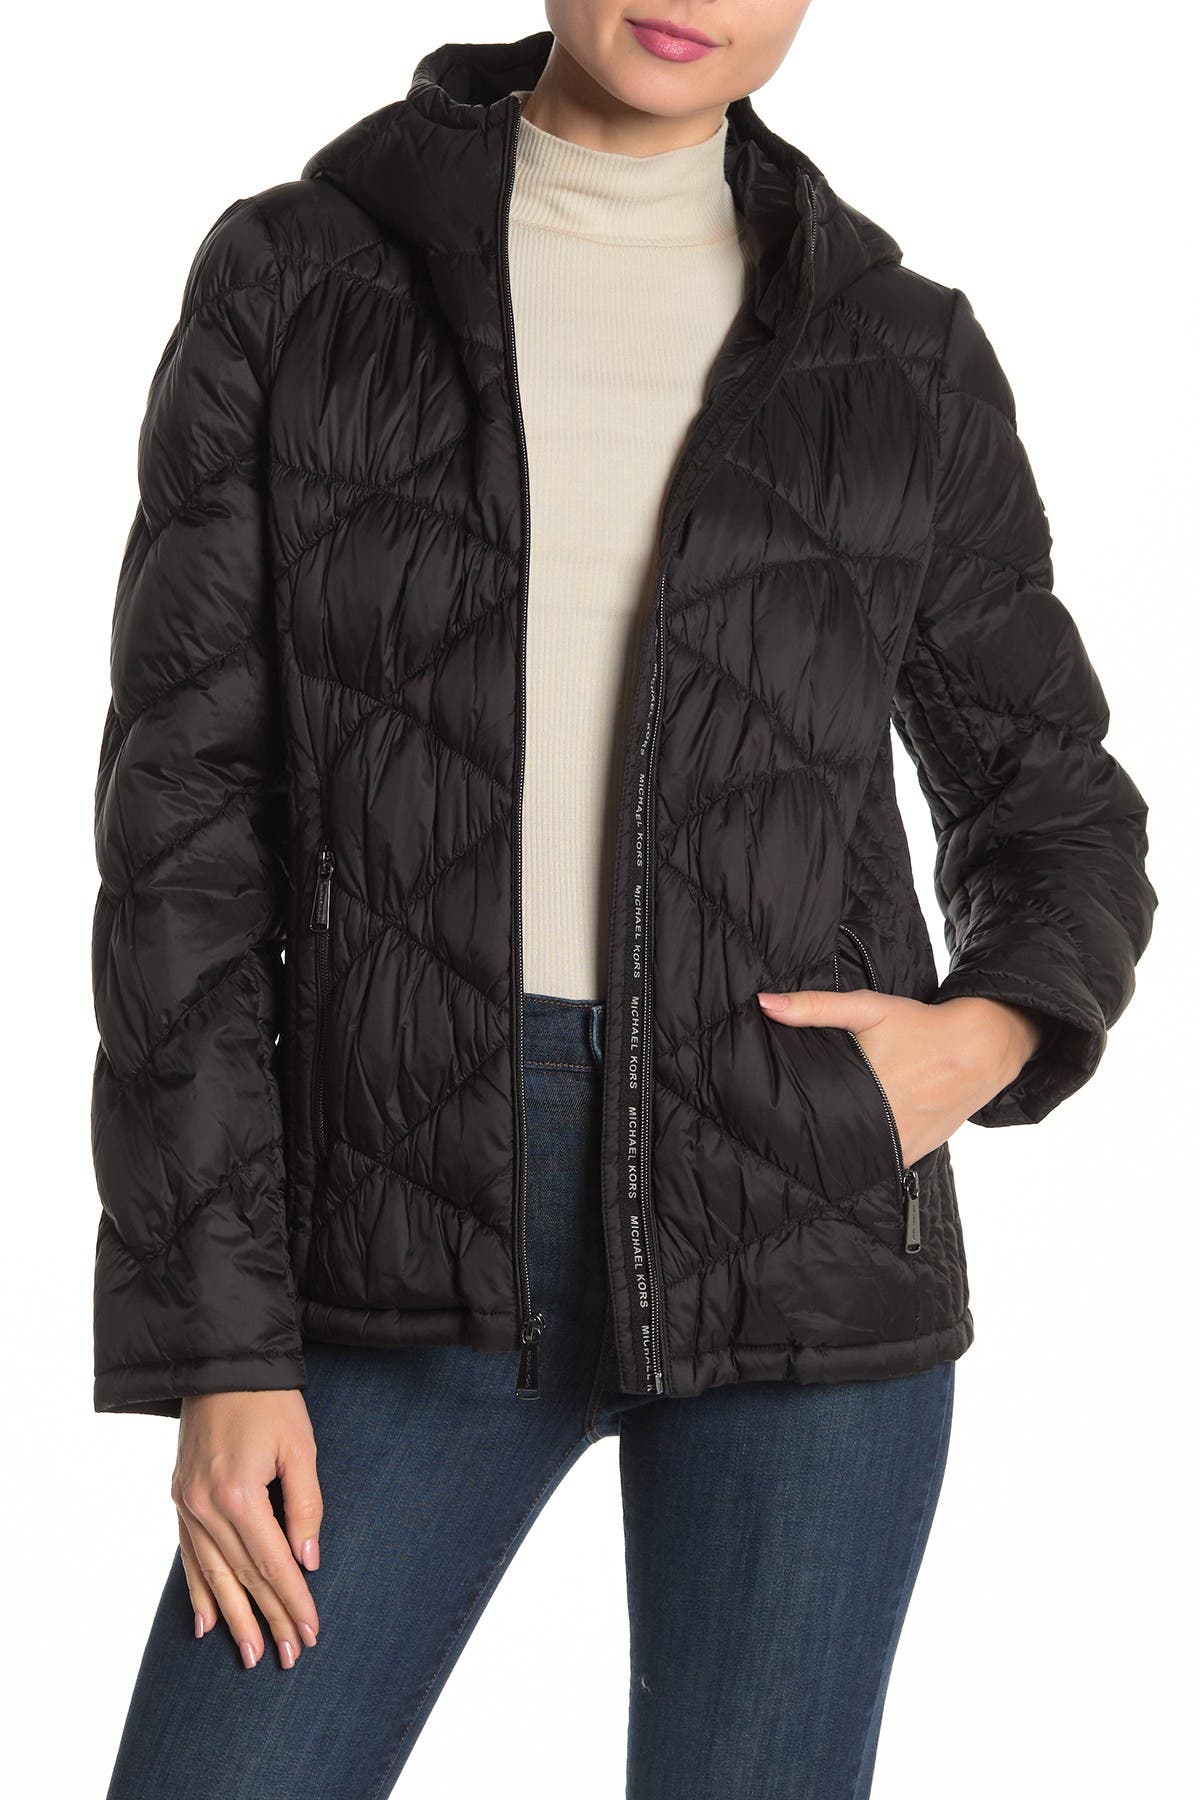 michael kors packable down jacket taupe